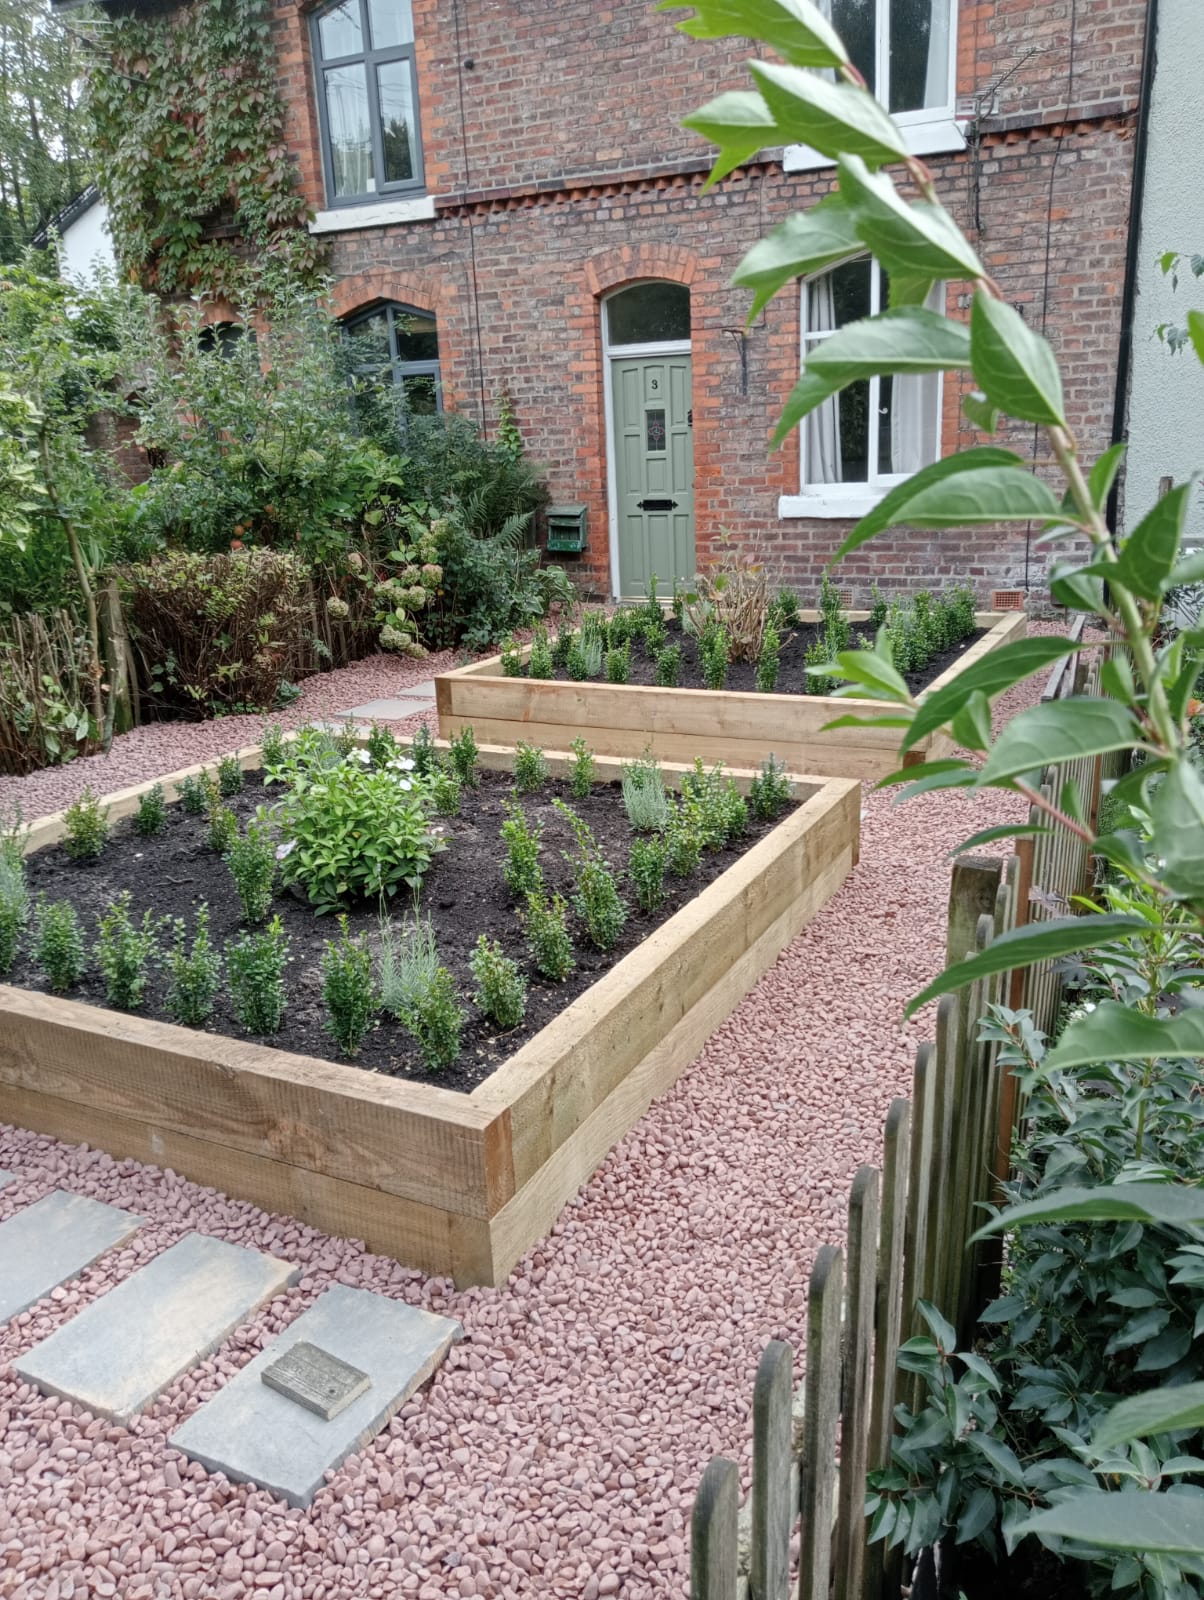 Cottage garden with raised wooden beds